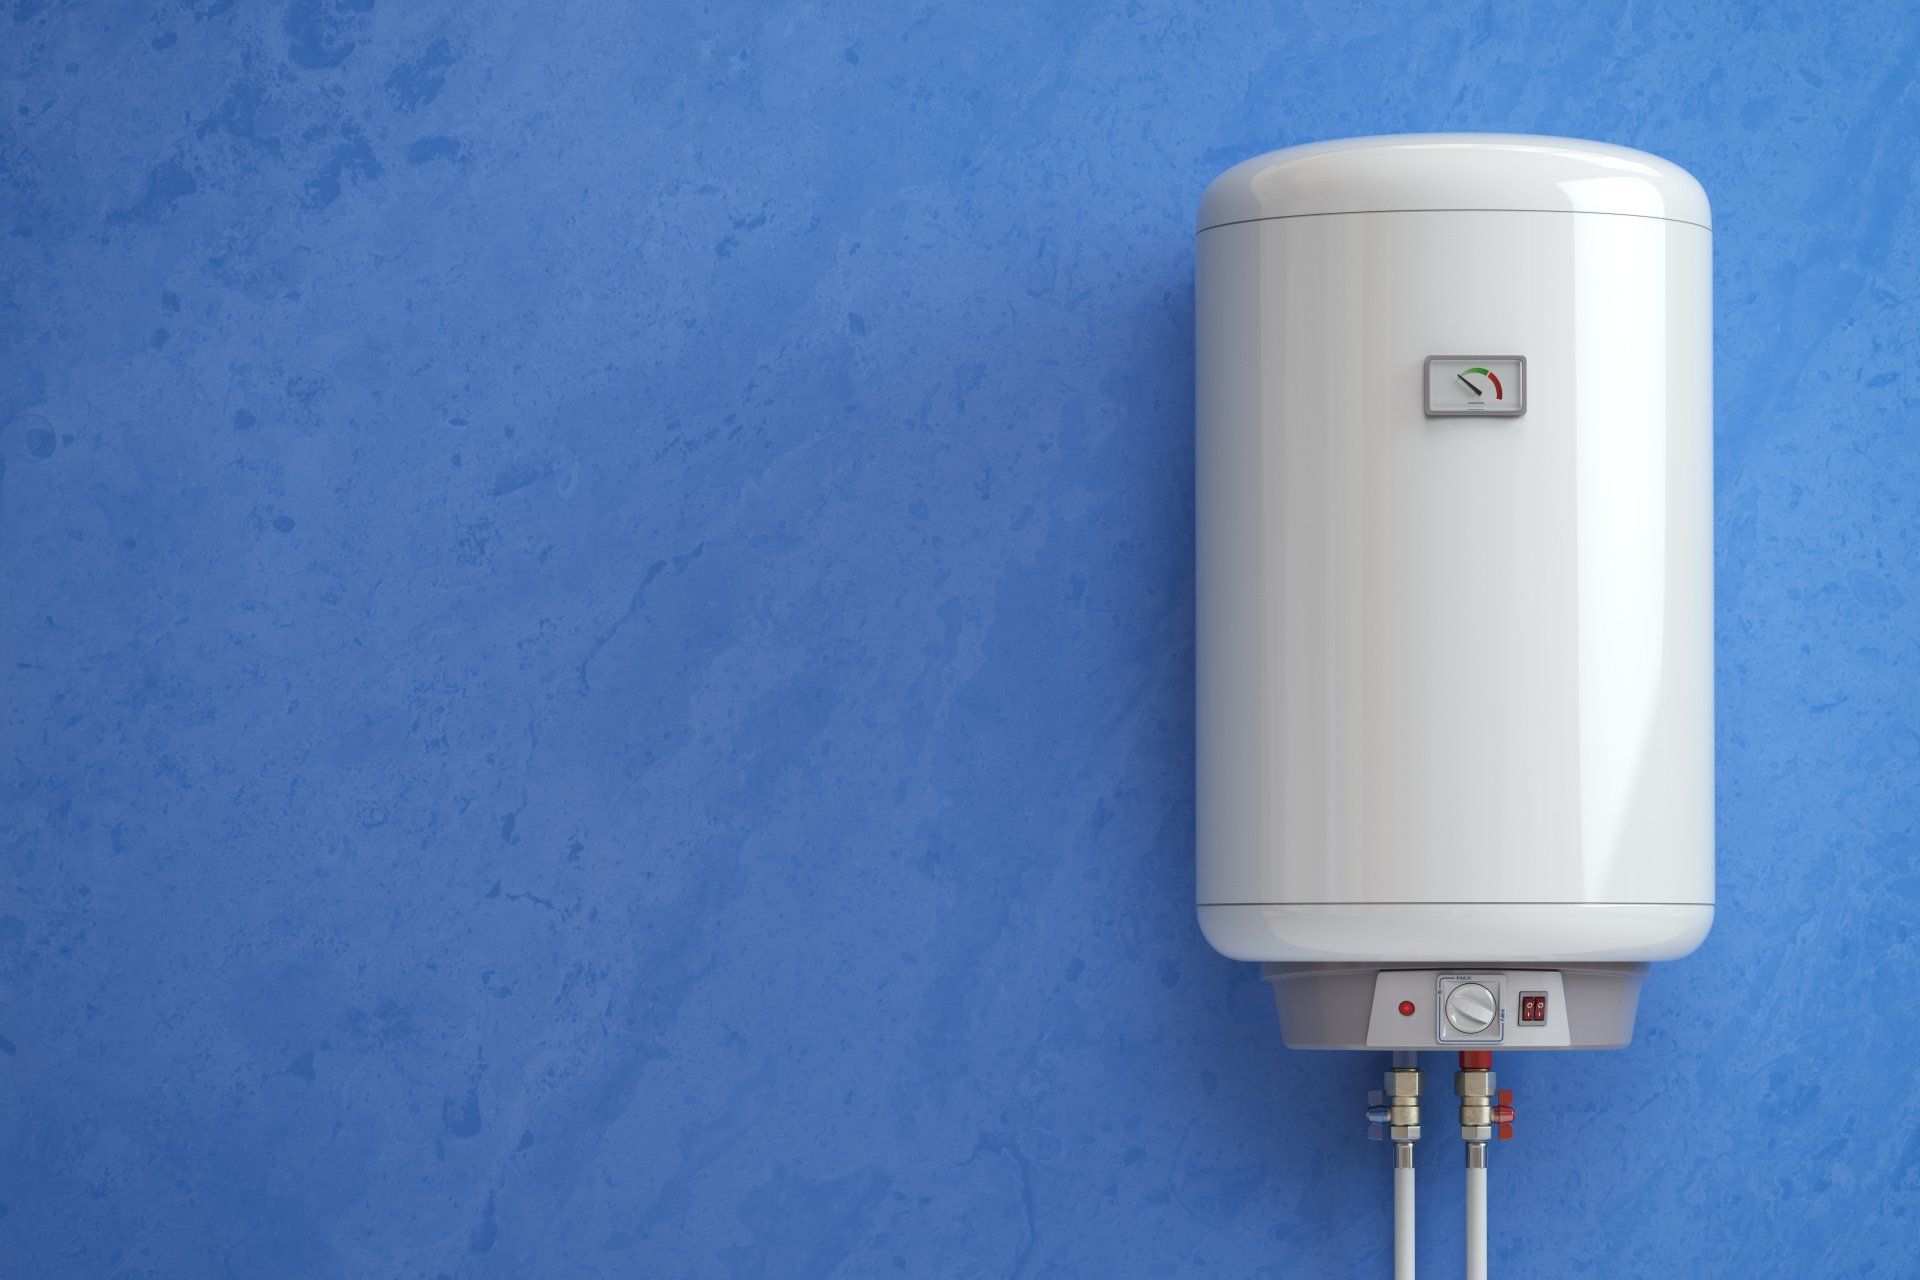 point of use water heater